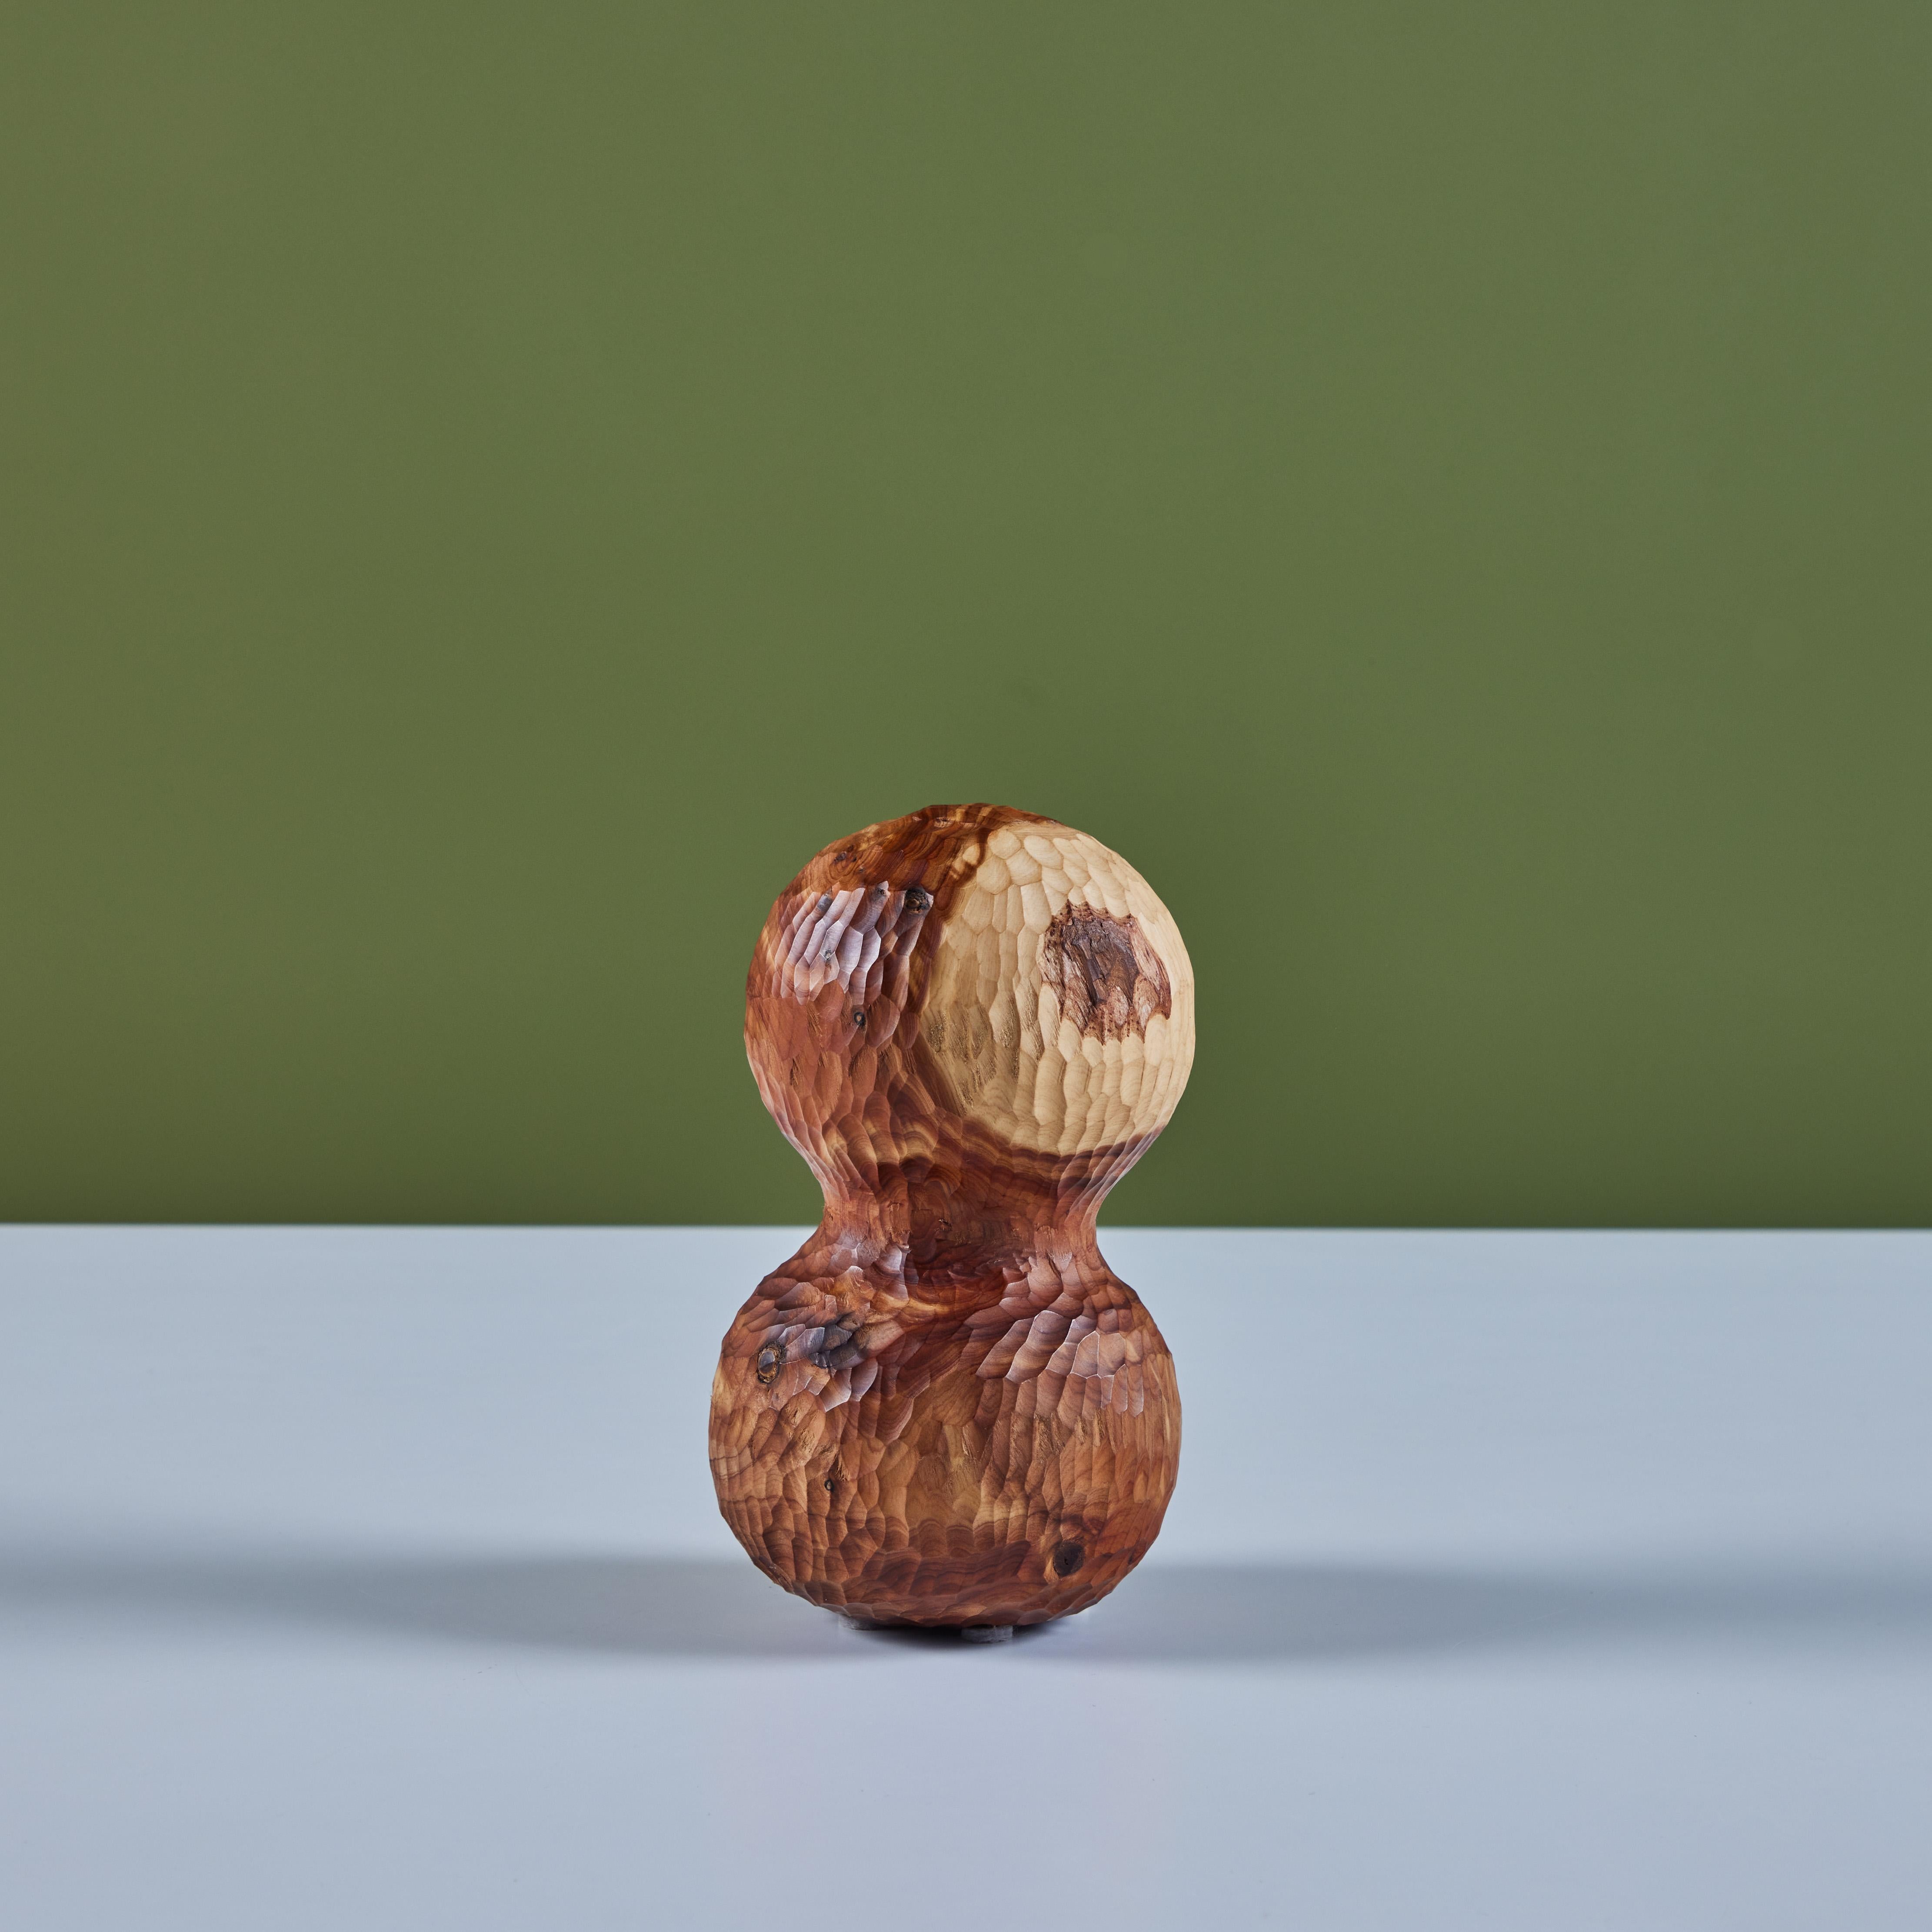 Hand carved juniper sculpture by contemporary Los Angeles designer, David O'Brien of Hawk & Stone. David's appreciation for nature and wood has deep roots back in New England. This sculpture features a two stacked spheres with textured hand carving